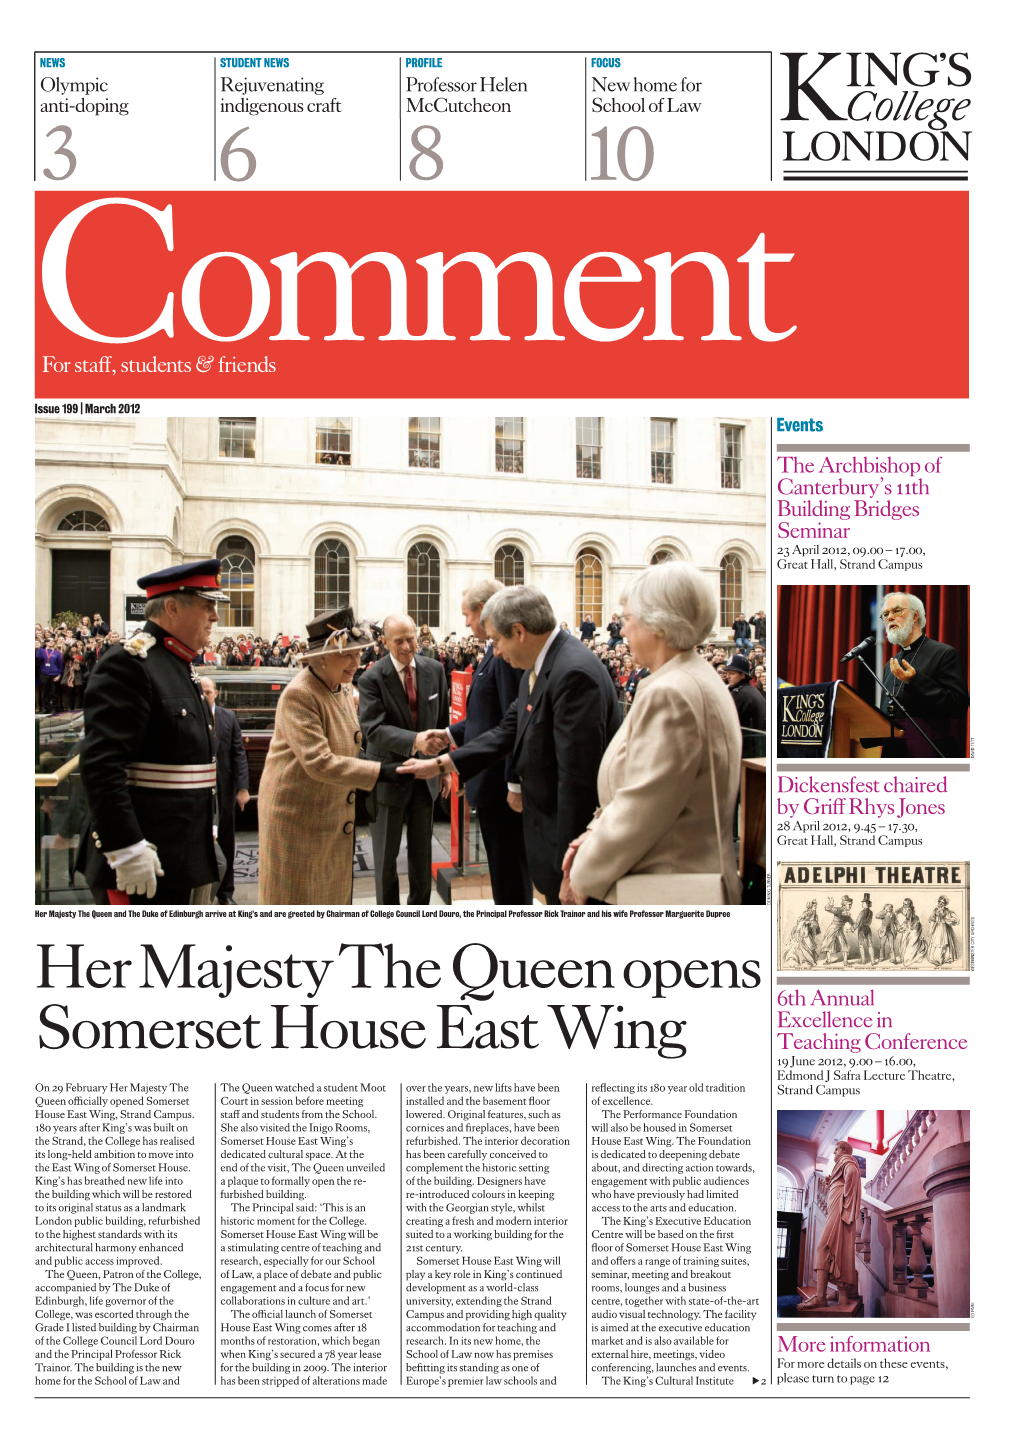 Her Majesty the Queen Opens Somerset House East Wing